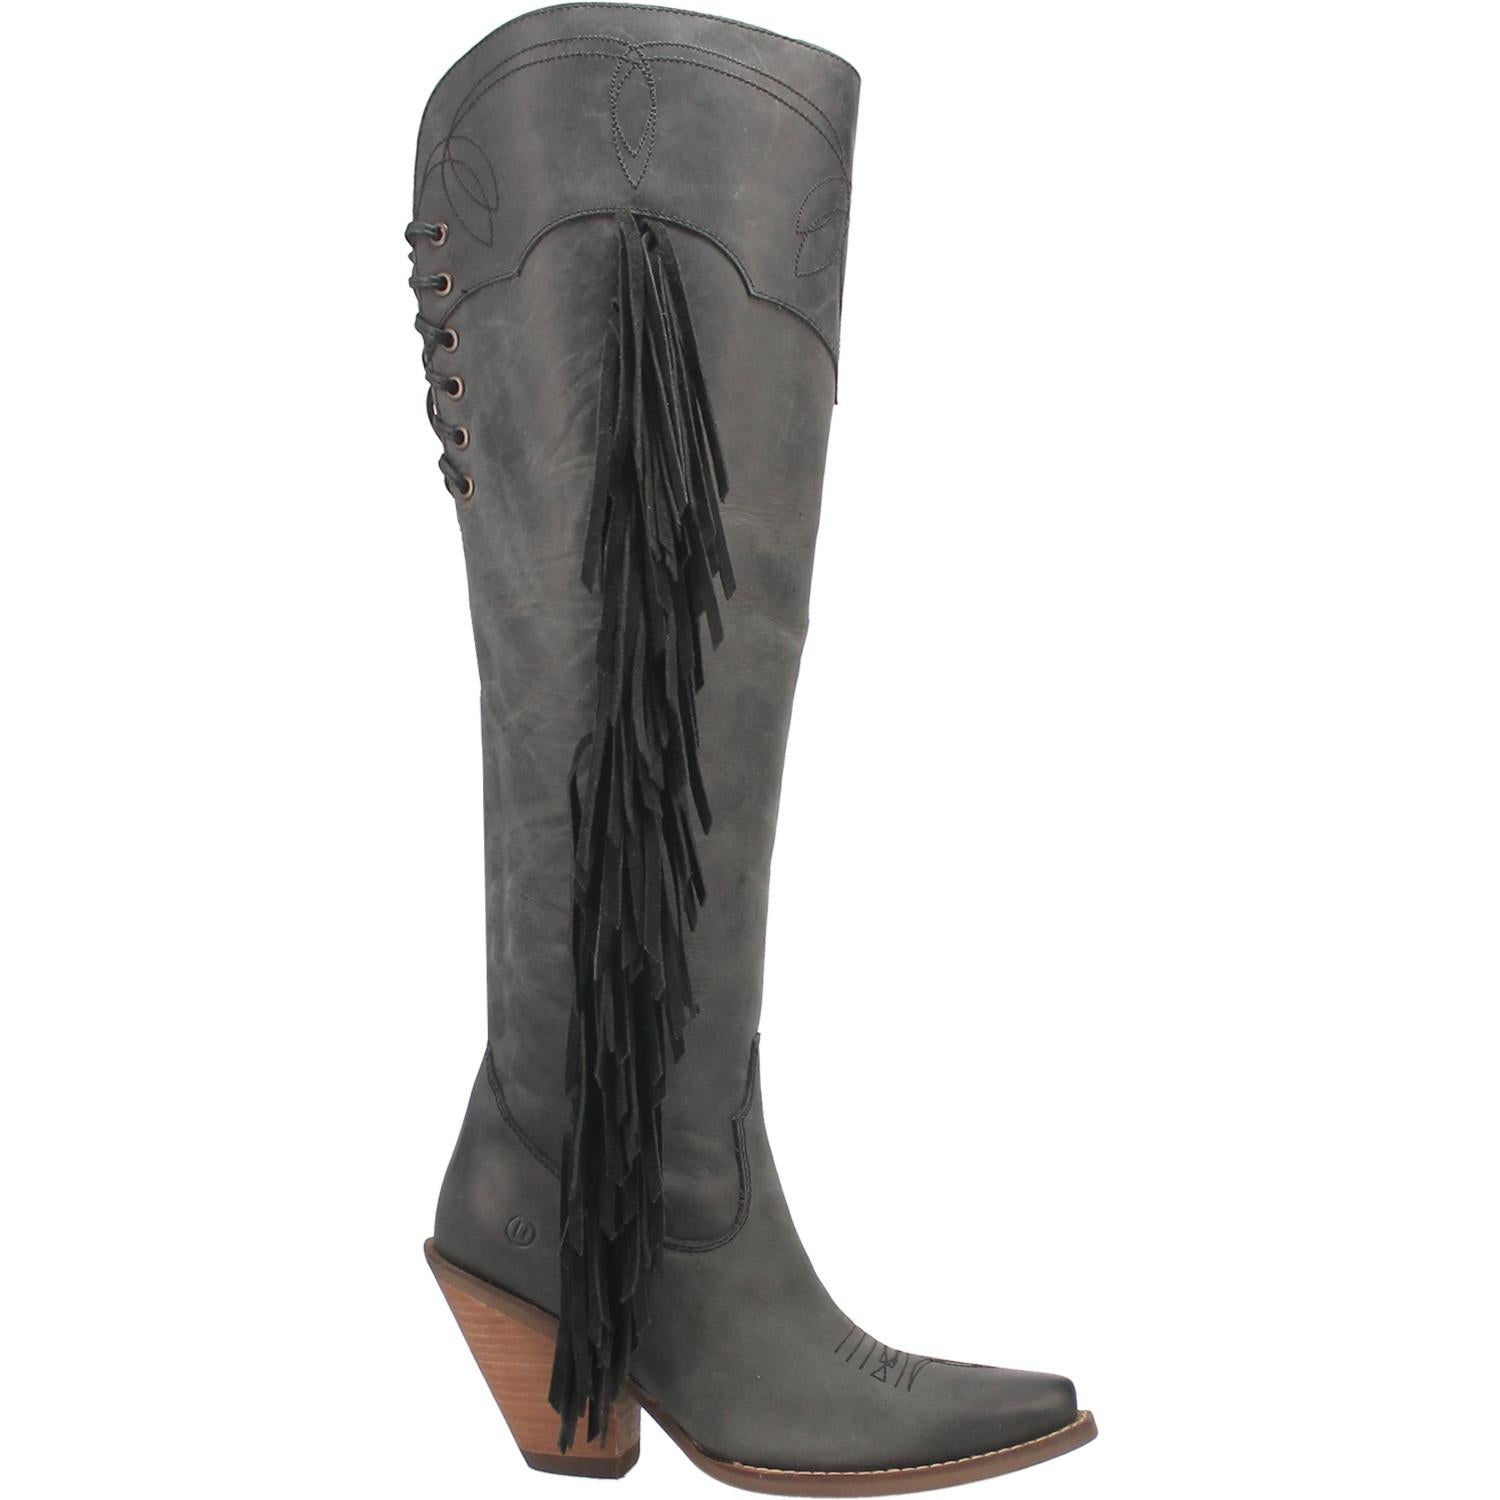 A tall black leather boot with a short heel, stitched desings at the top and bottom, lace up back, fringe down the right side, and a half zipper. Item is pictured on a plain white background